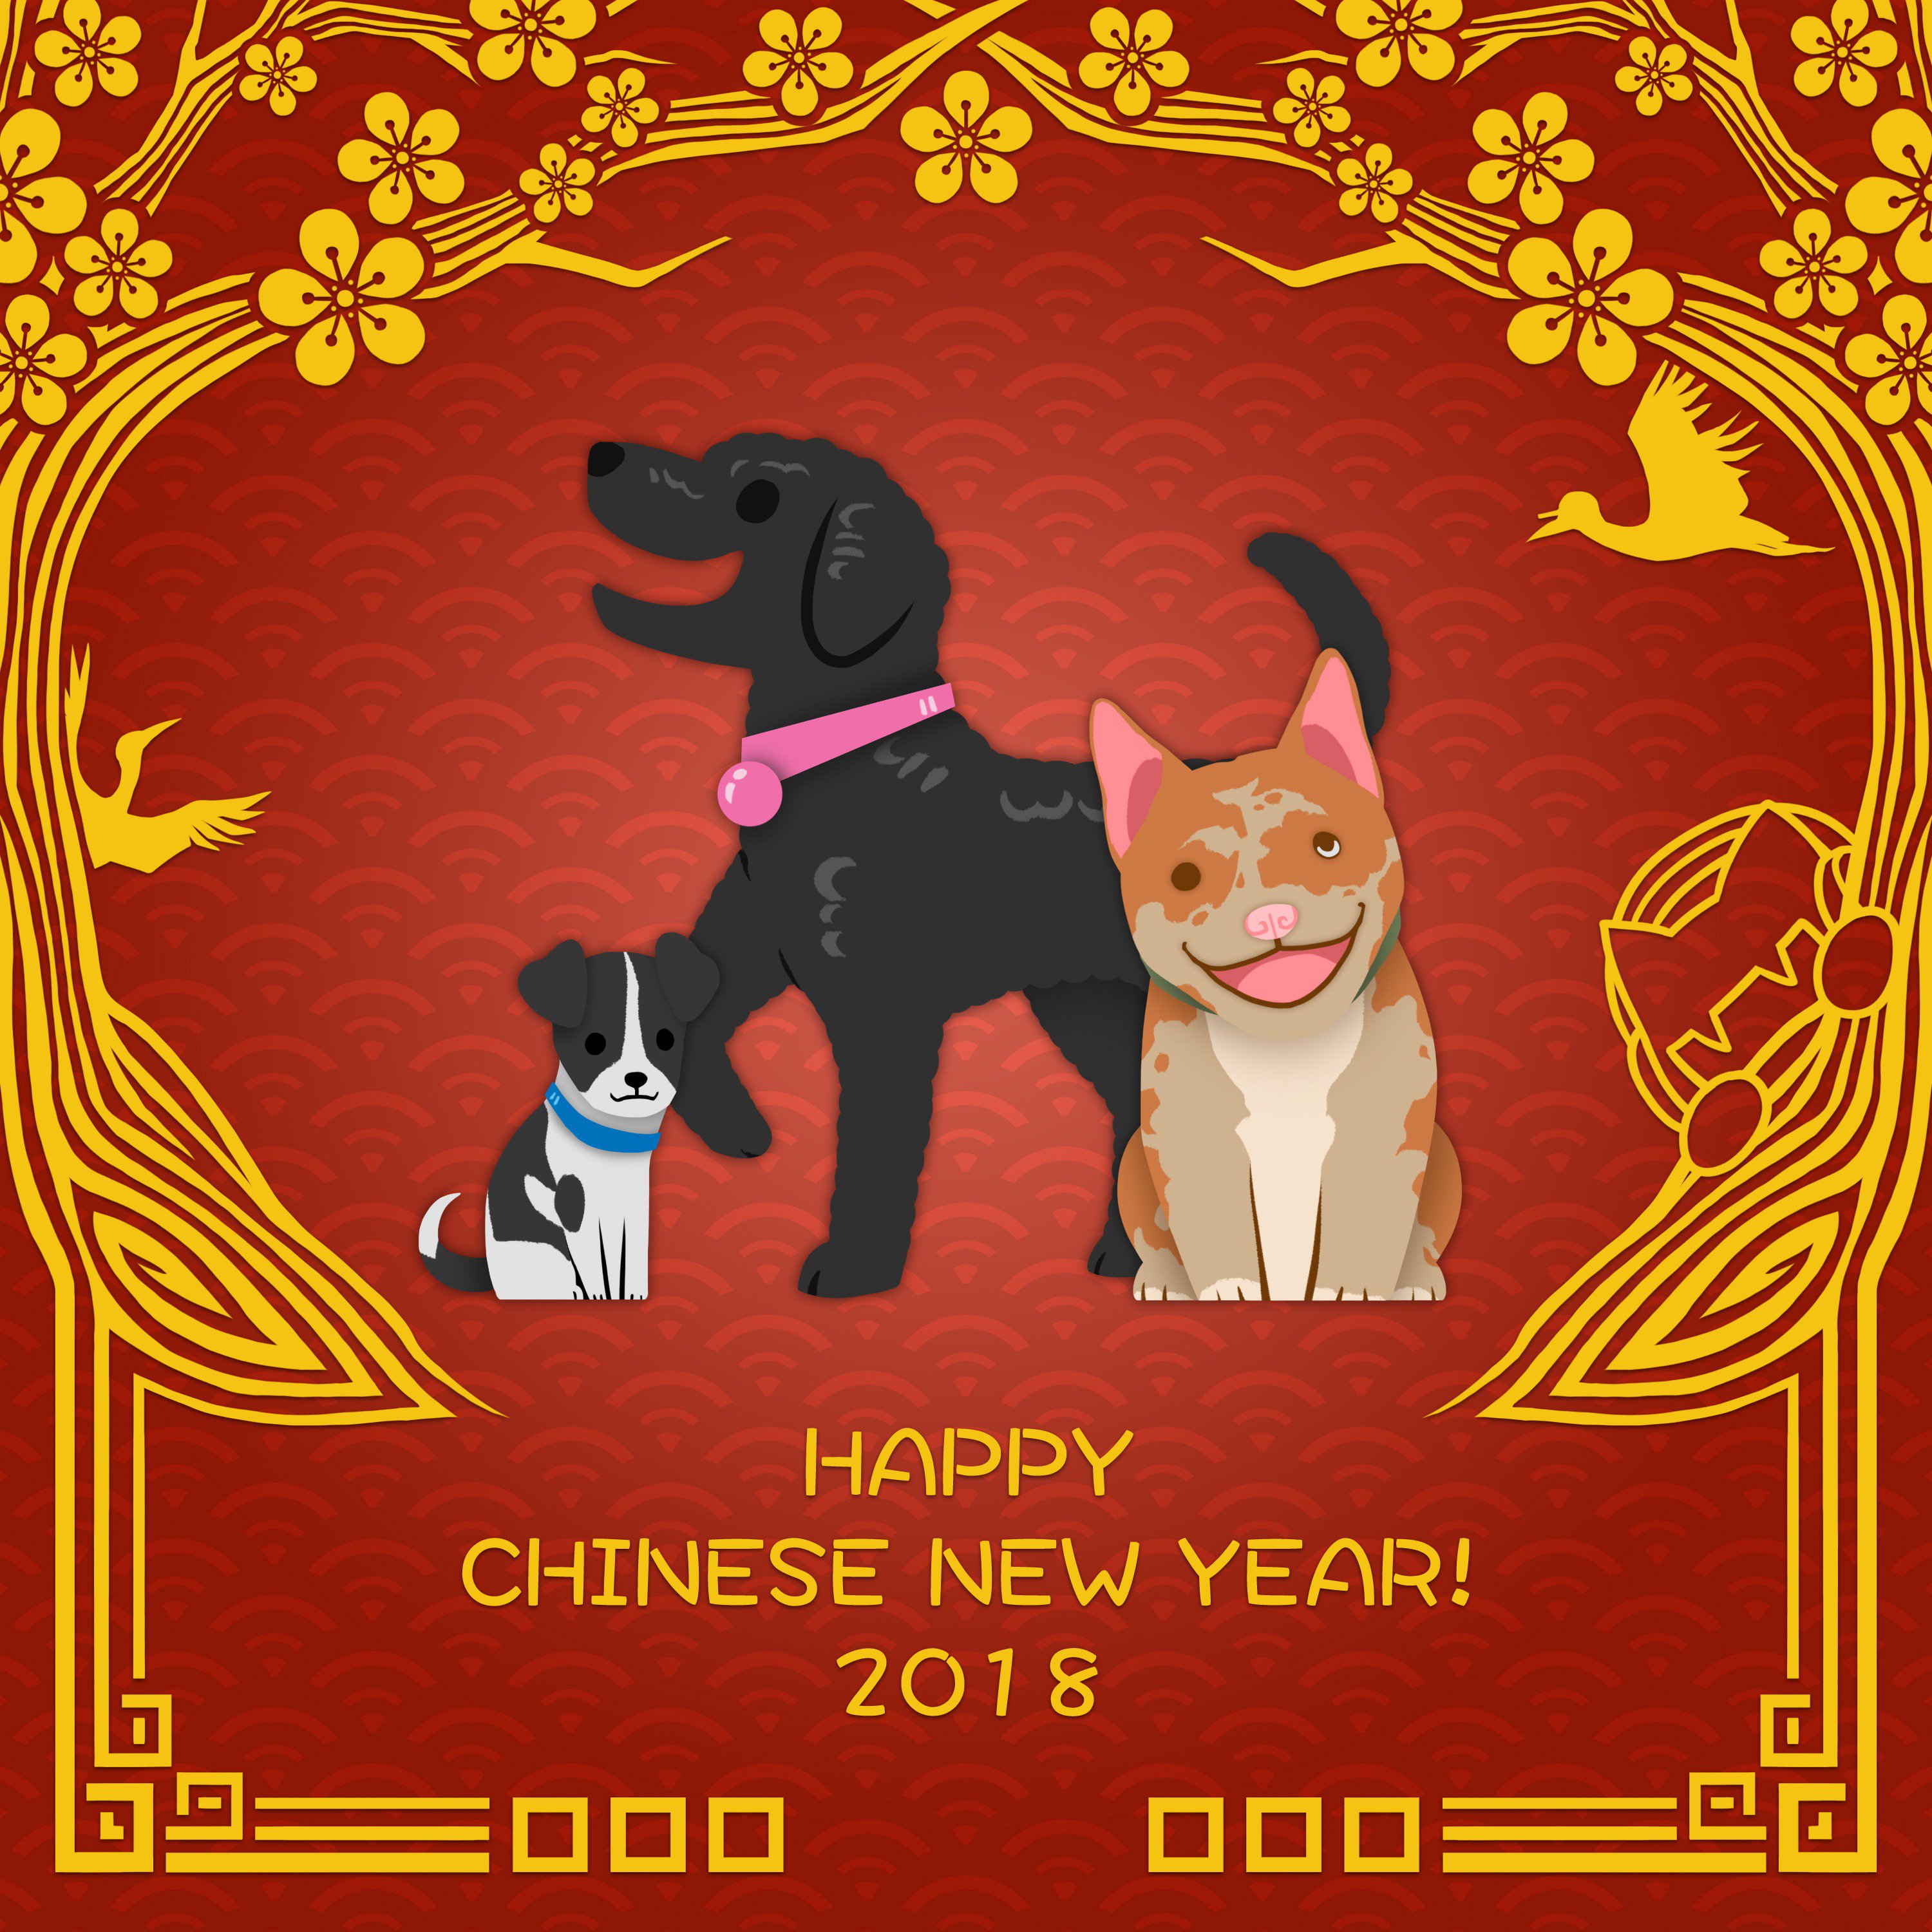 Chinese New Year 2018: Pictures of Year of Dog Celebrations